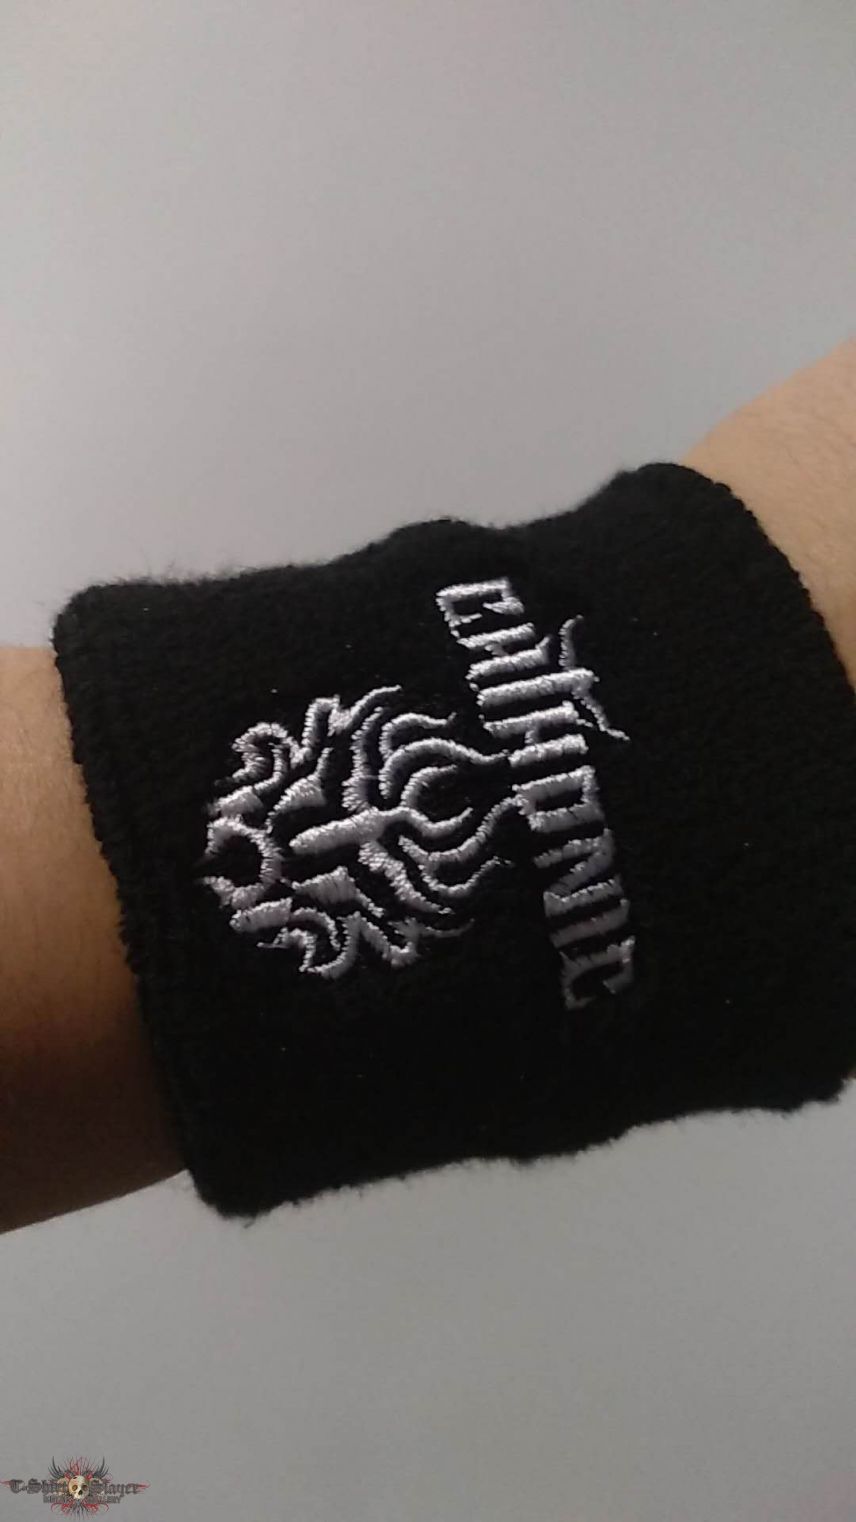 Chthonic Wristbands